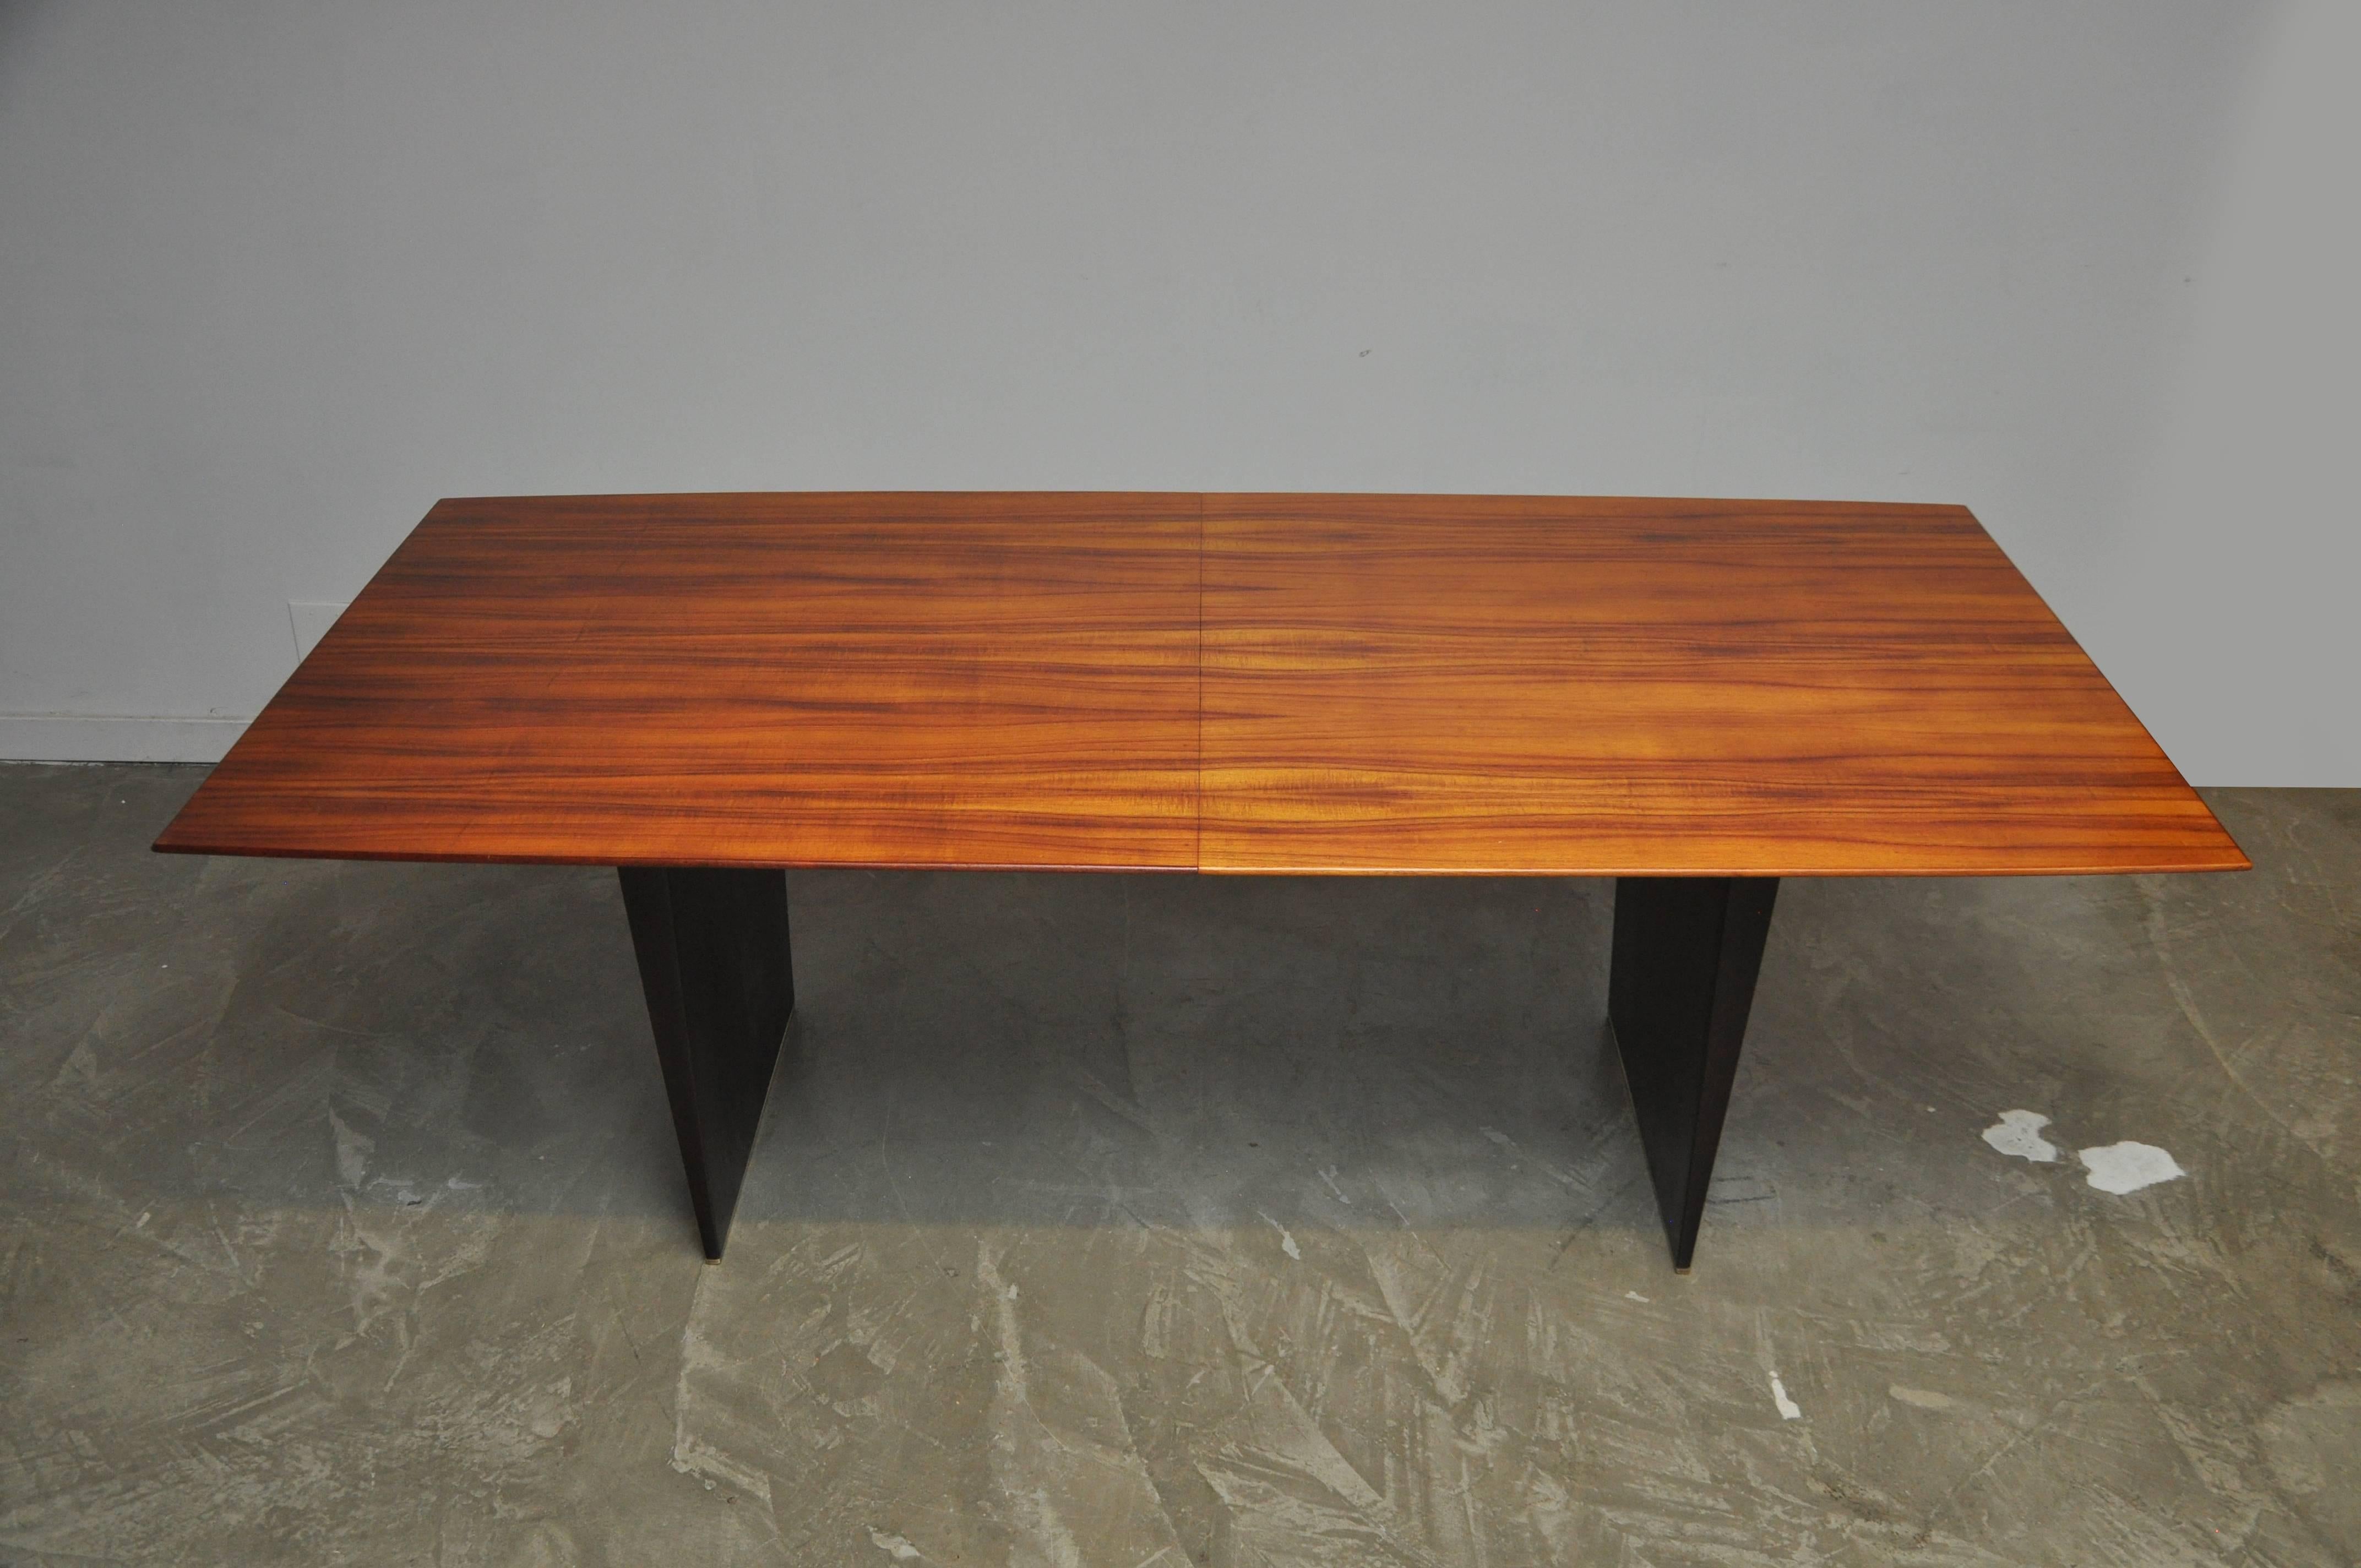 Extension dining table No. 5461 by Edward Wormley for Dunbar. Figured Tawi top on mahogany slab bases with brass shoes. 84